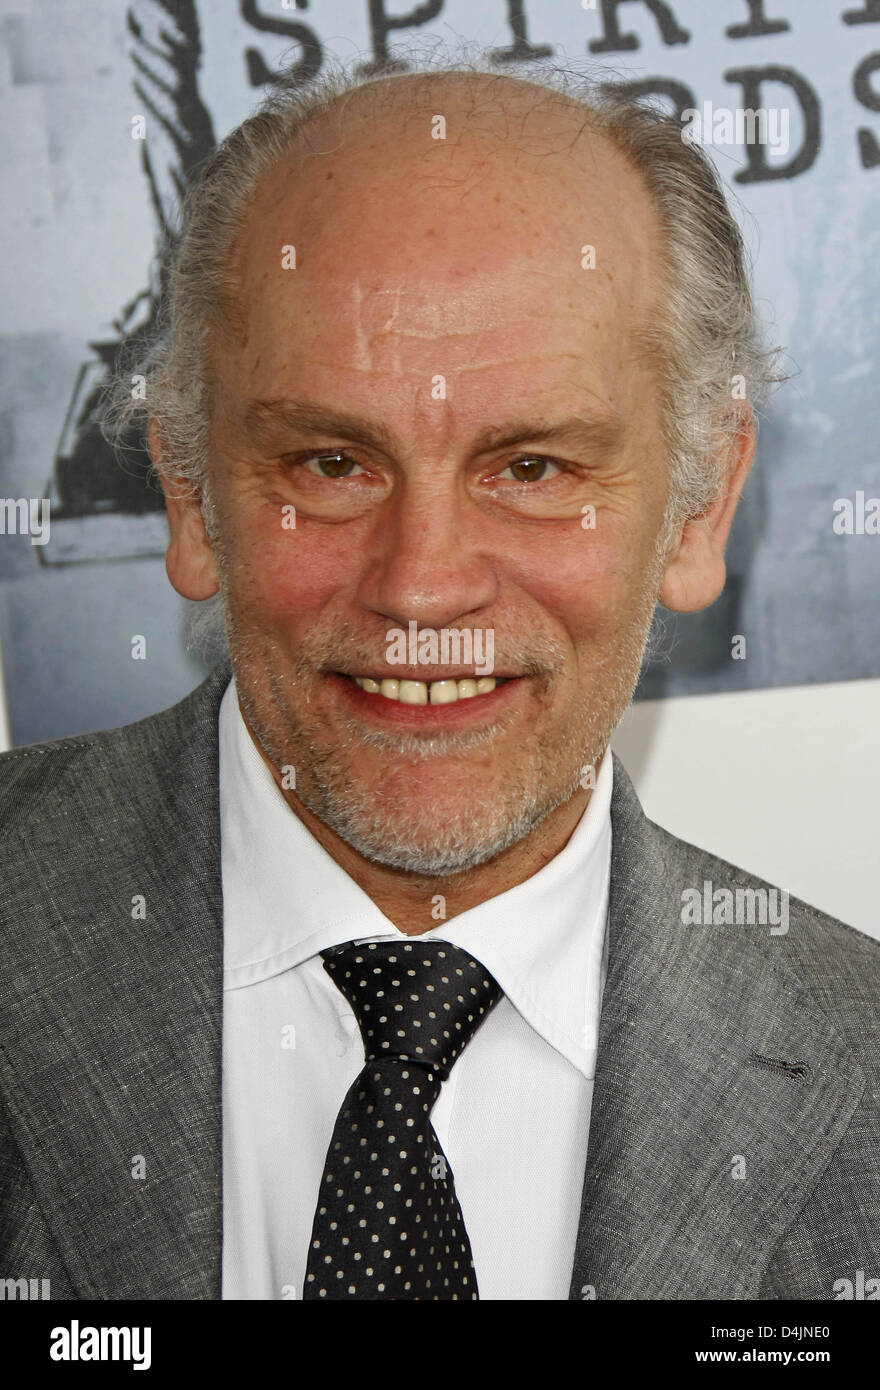 Actor John Malkovich arrives at the 2009 Film Independent's Spirit Awards at a tent on Santa Monica Beach in Los Angeles, USA, 21 February 2009. Photo: Hubert Boesl Stock Photo